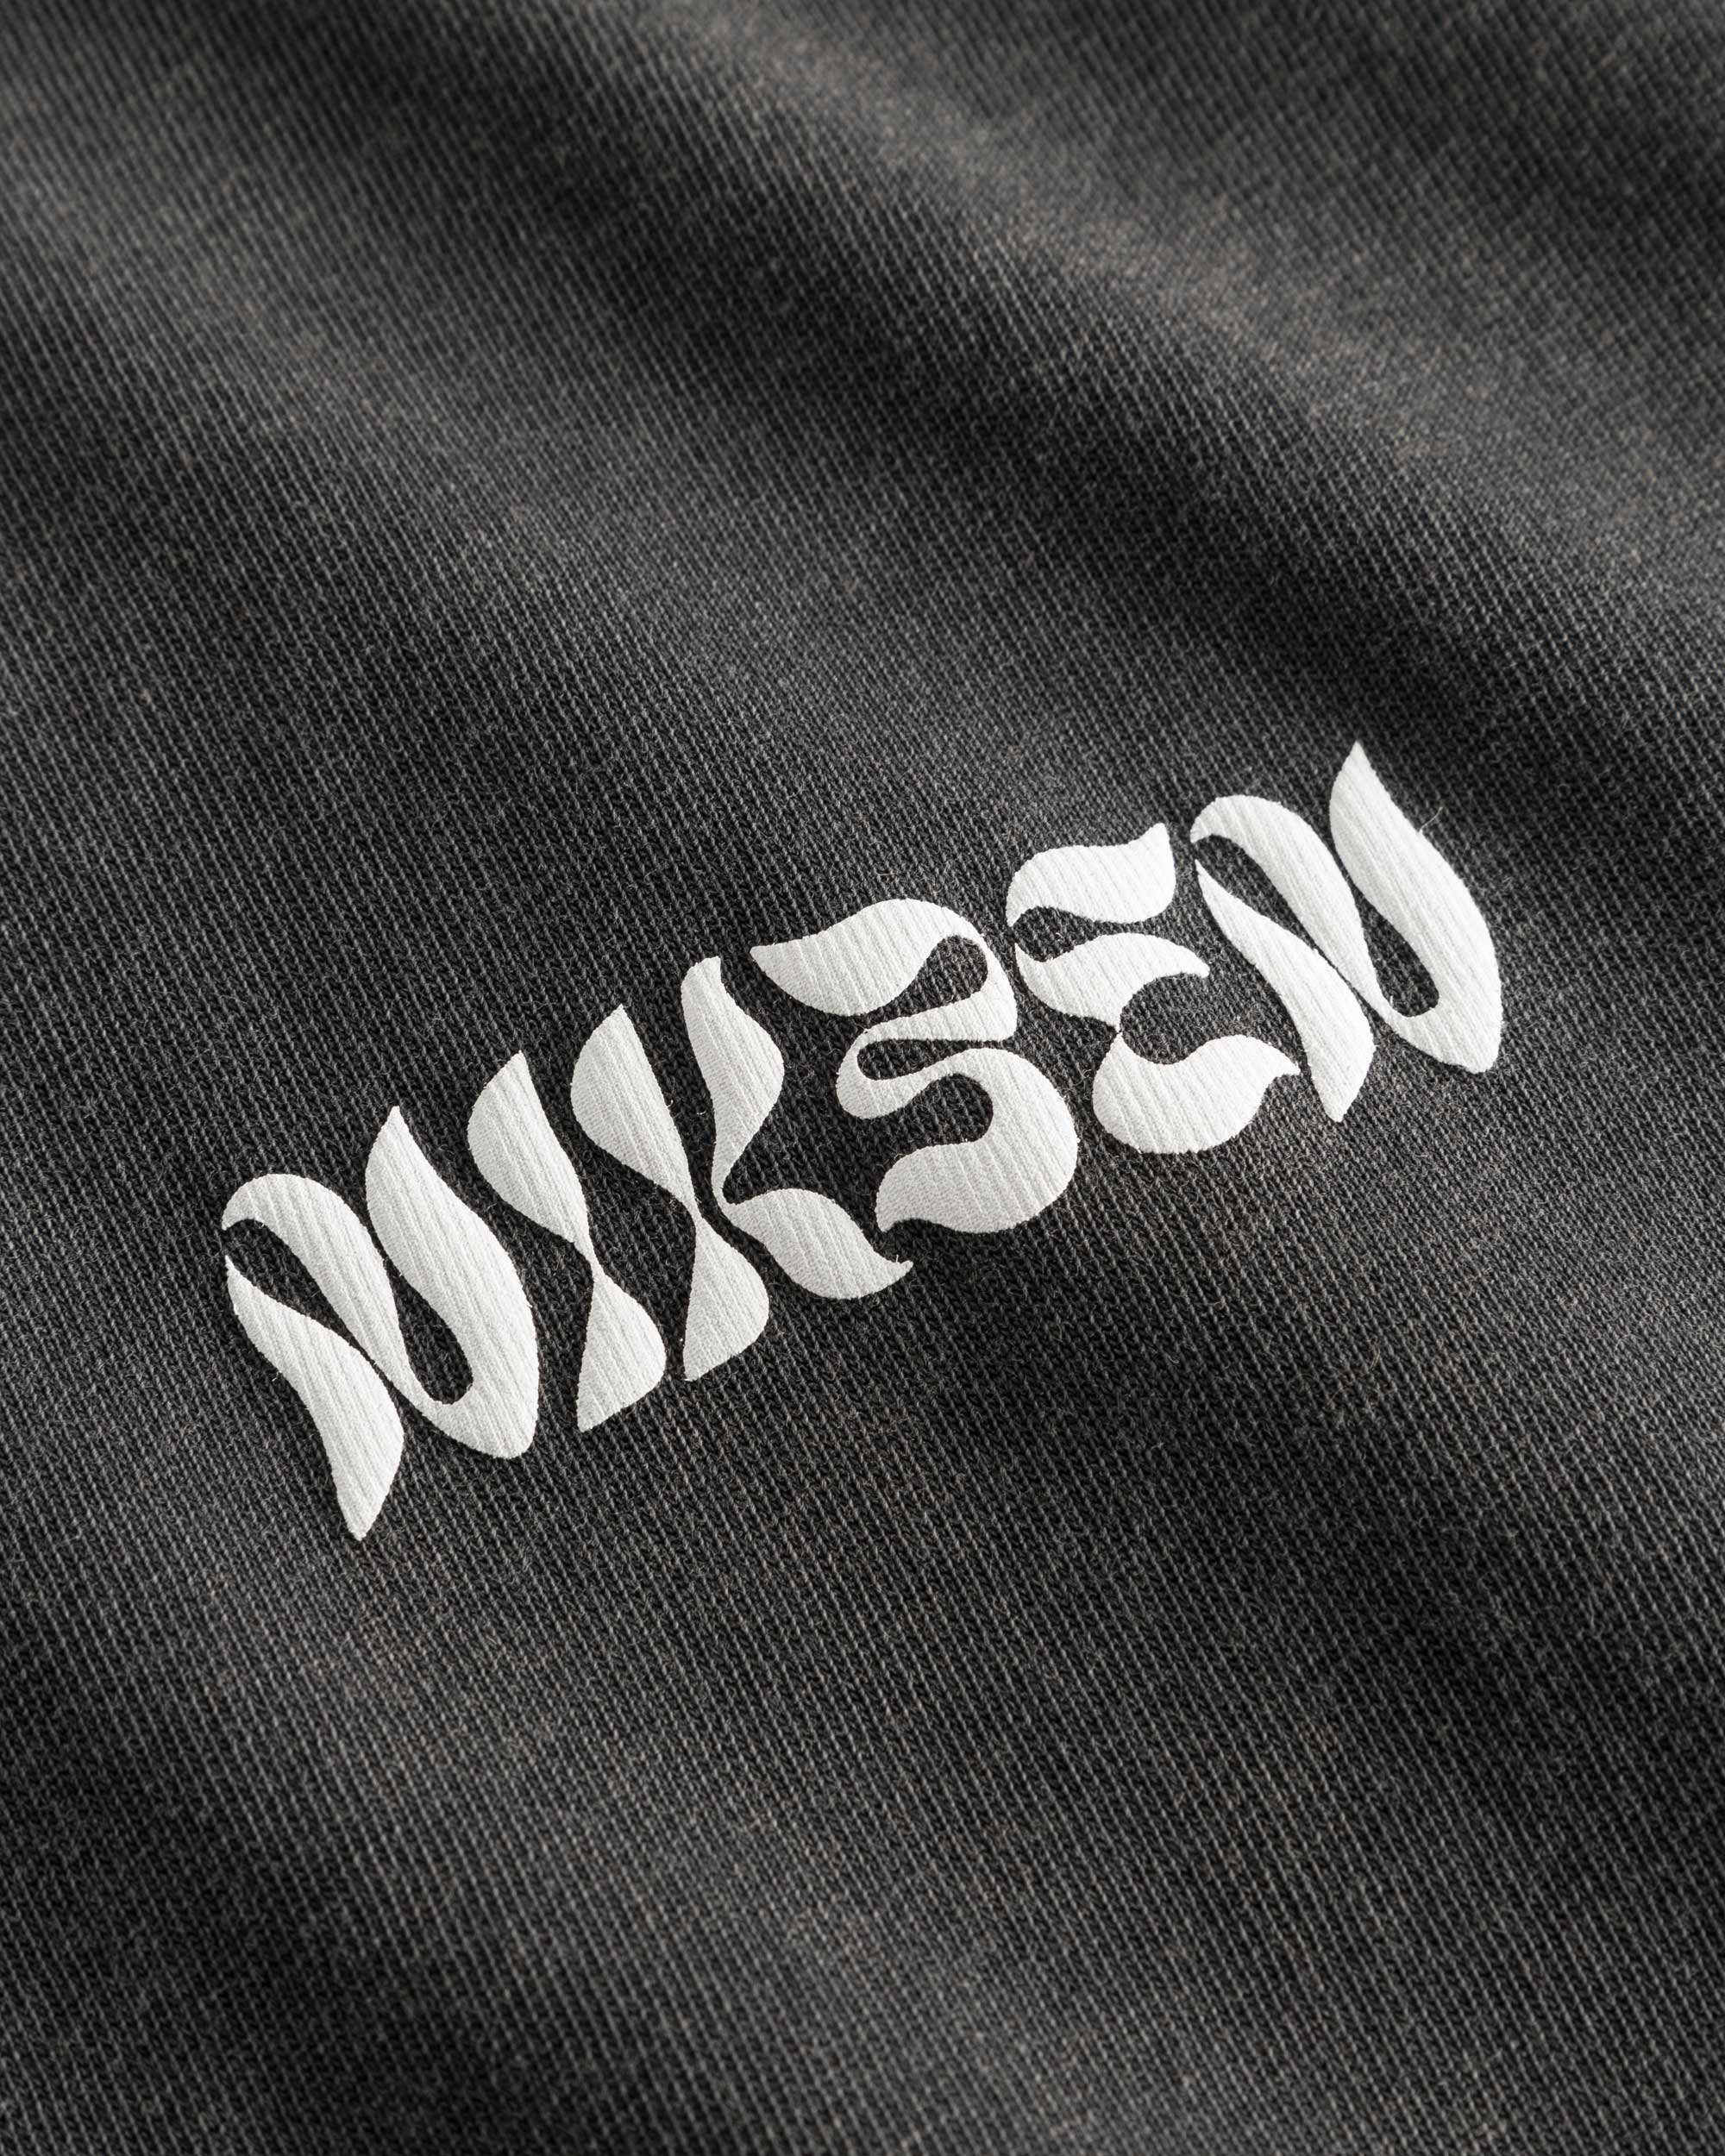 Close up of white text logo on washed black t-shirt